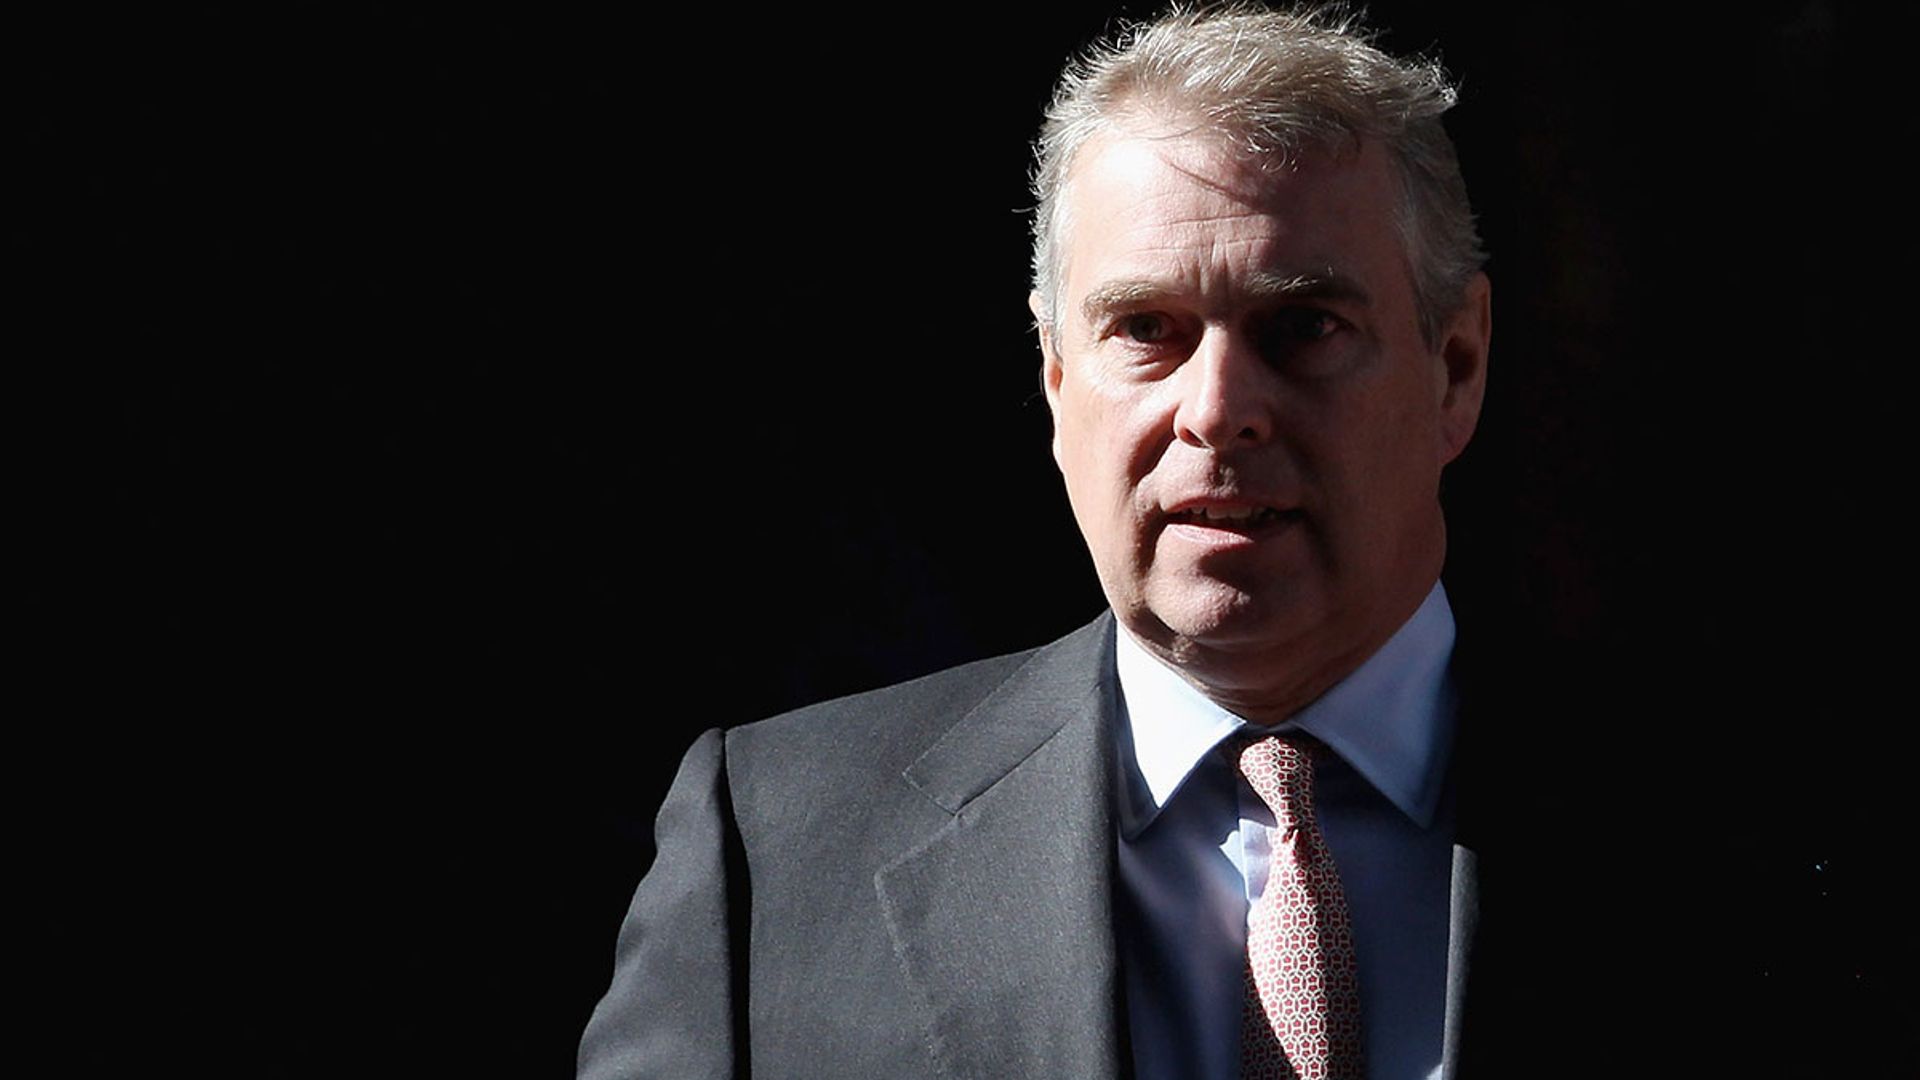 Prince Andrew deletes social media accounts after being stripped of titles